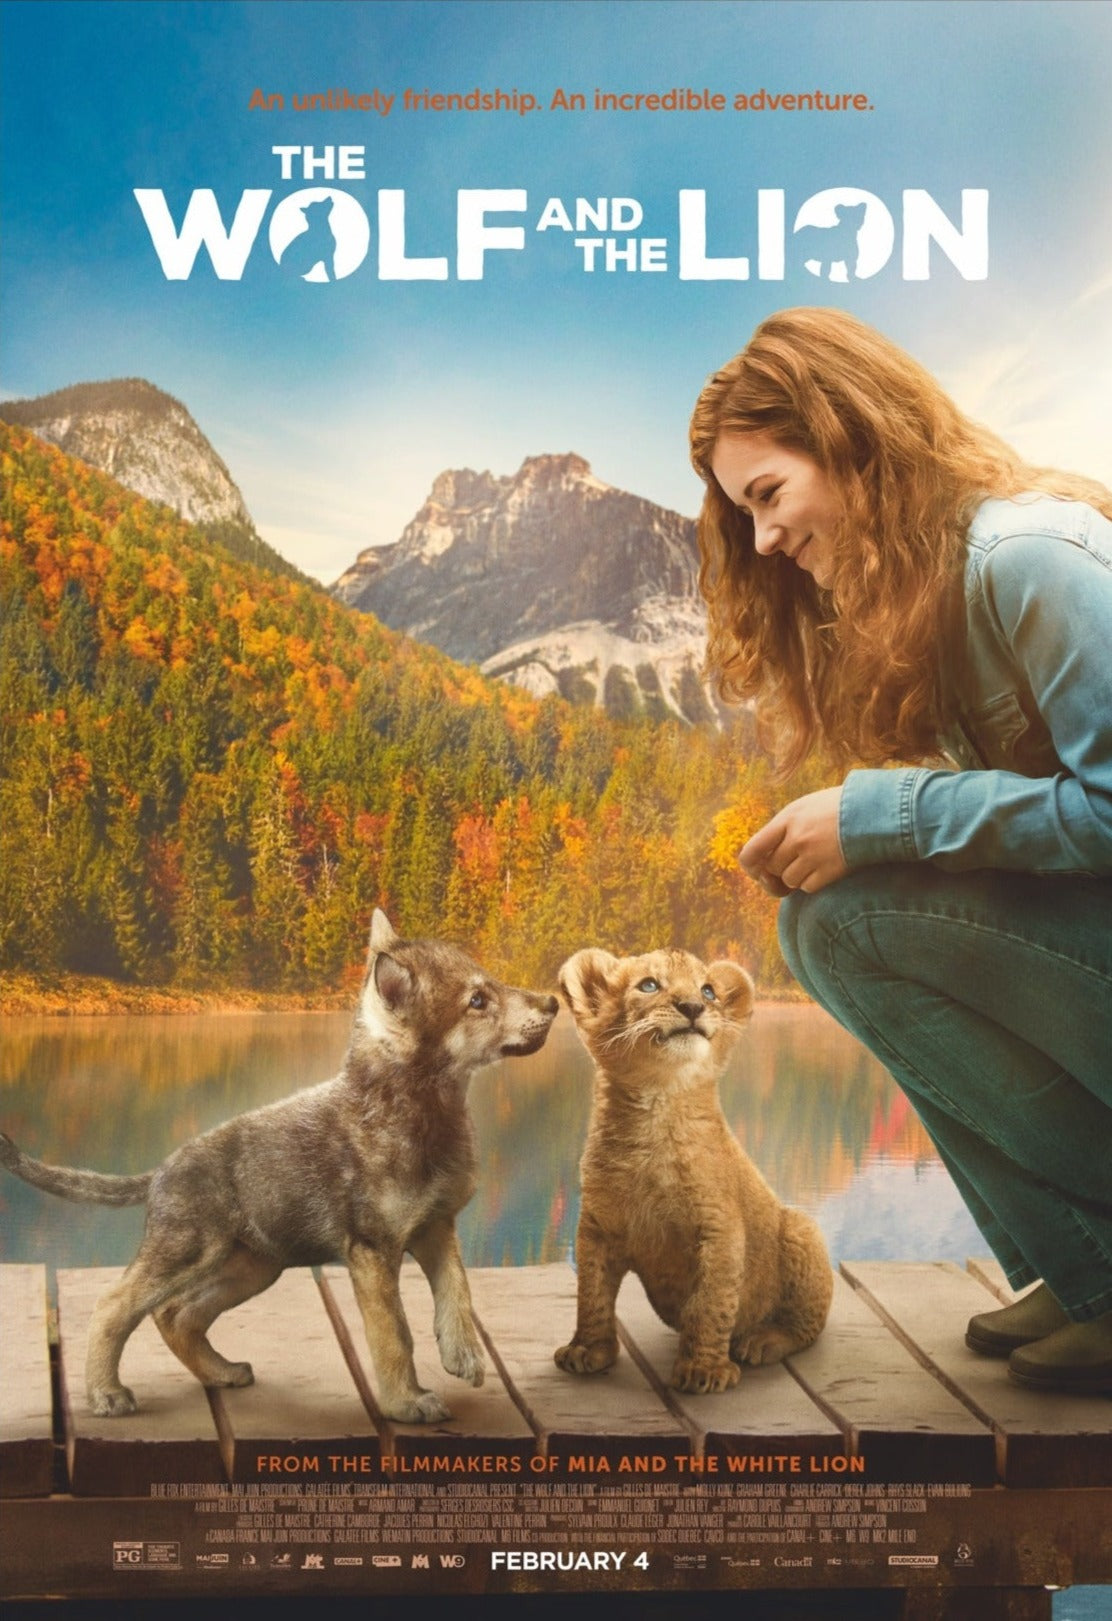 The Wolf and the Lion - Official Poster